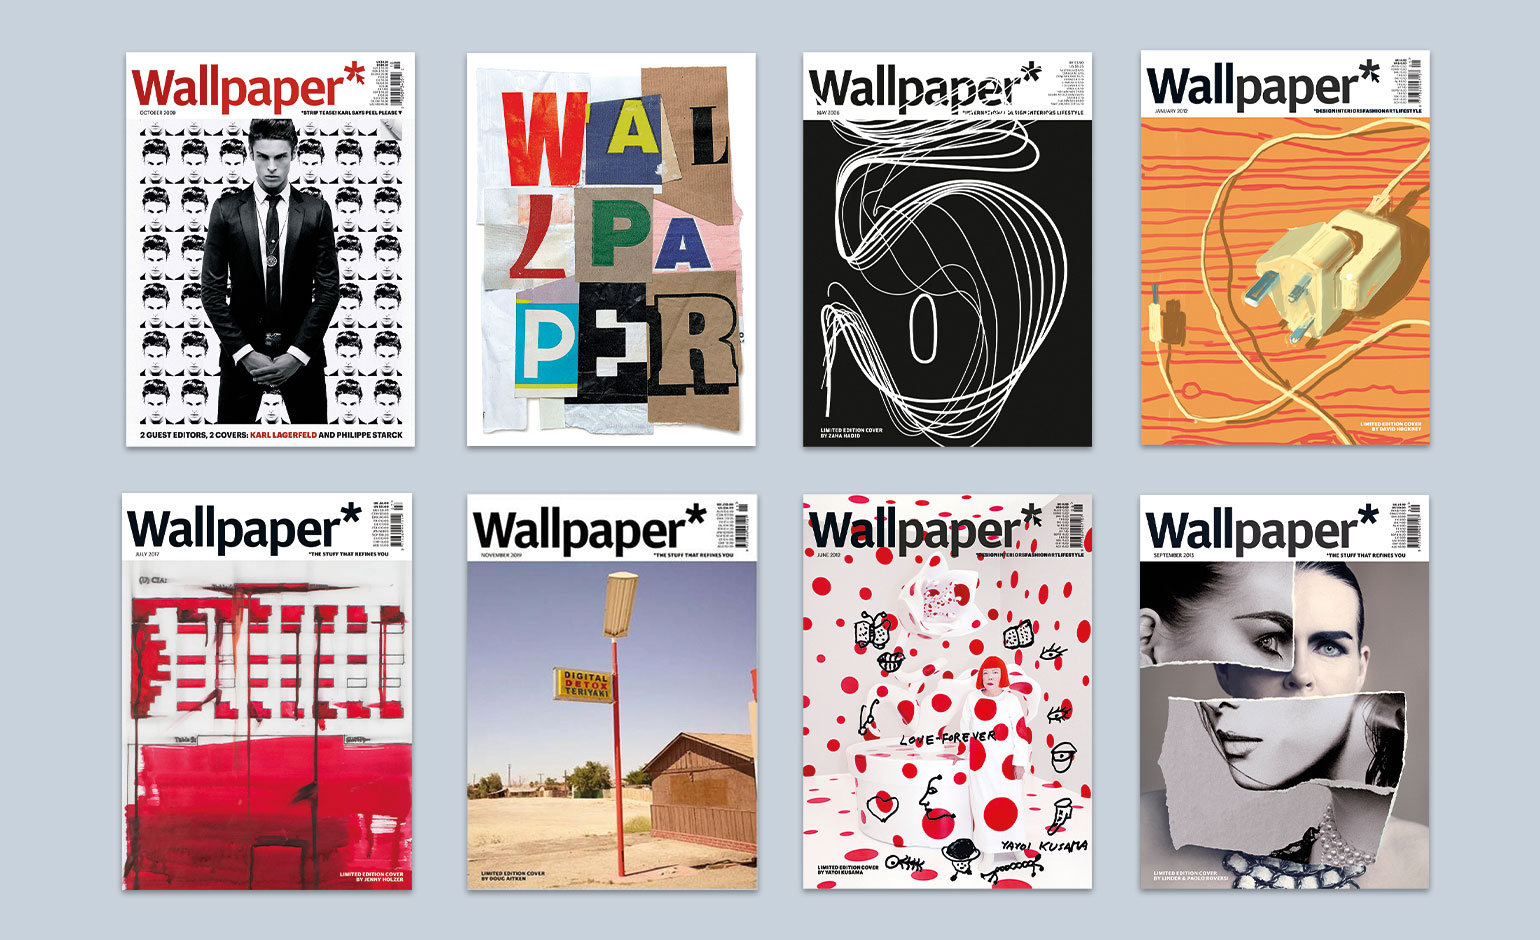 25 iconic Wallpaper* magazine cover designs by artists | Wallpaper